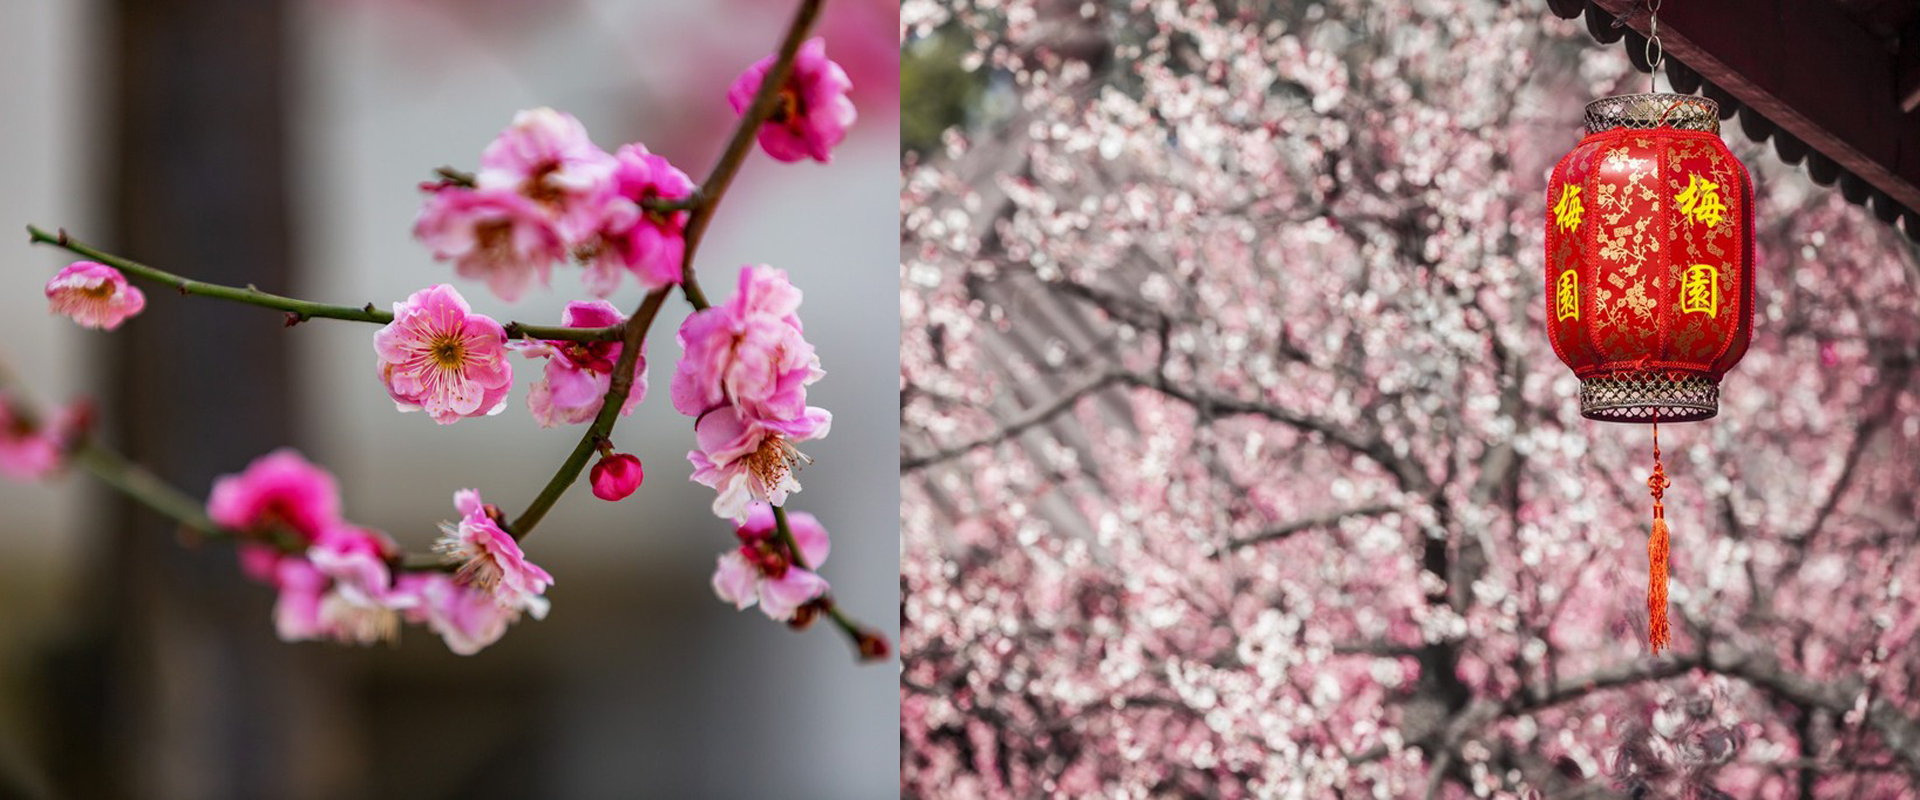 Blooming plums in Wuxi